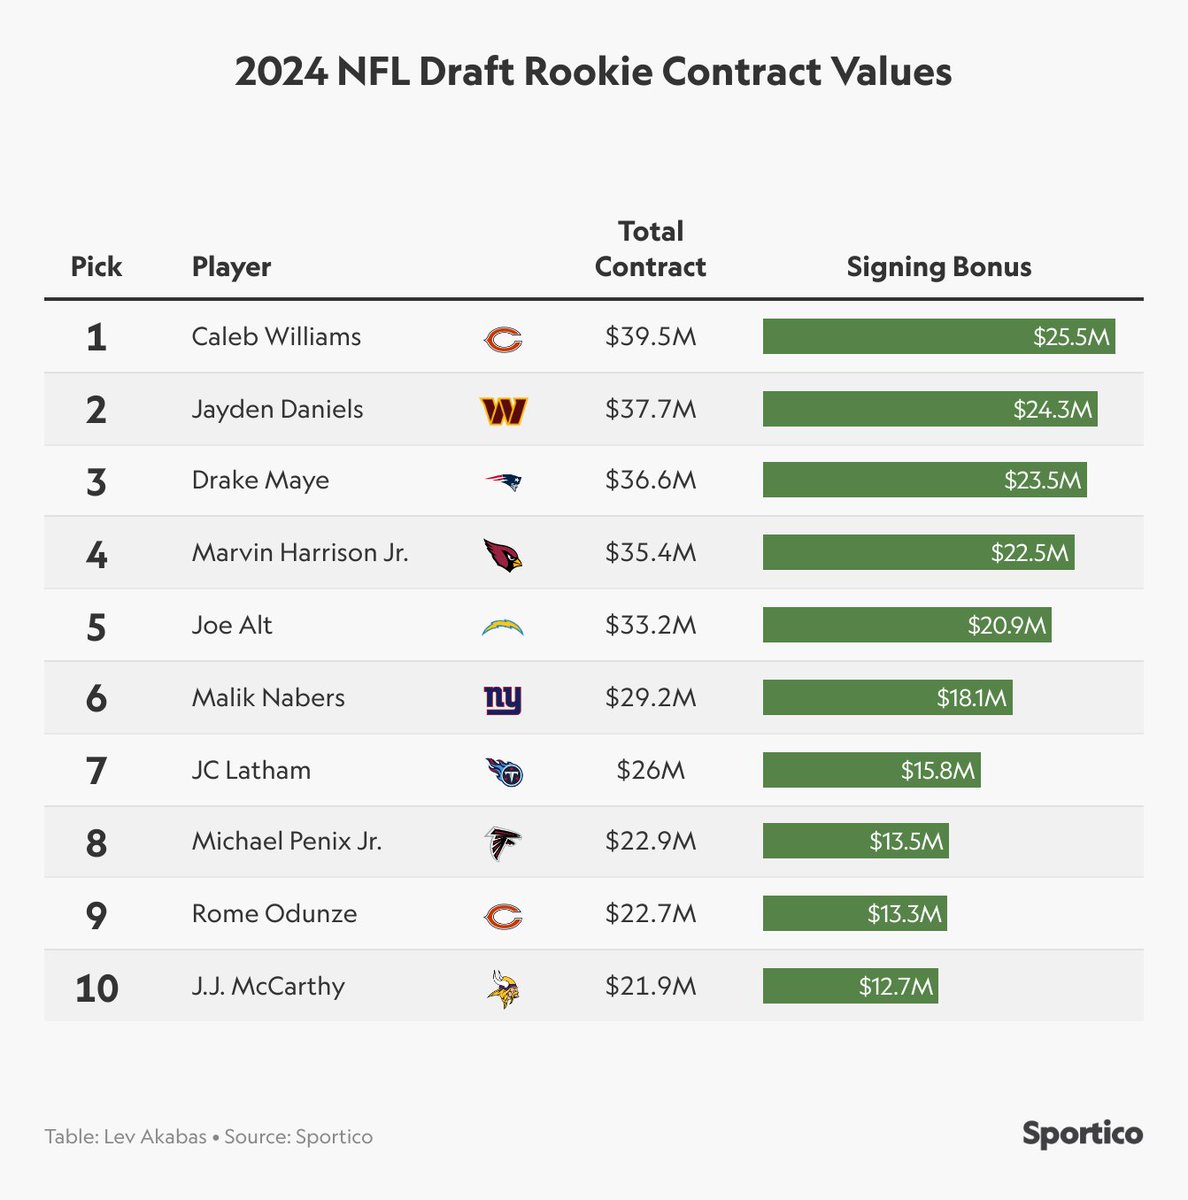 NFL rookie signing bonuses are up 3.8% this year, the first increase of more than 1% since 2020, as rookie compensation pools emerge from COVID shortfalls. Detals at @sportico with contract $ for all 32 1st rd pick. sportico.com/leagues/footba…